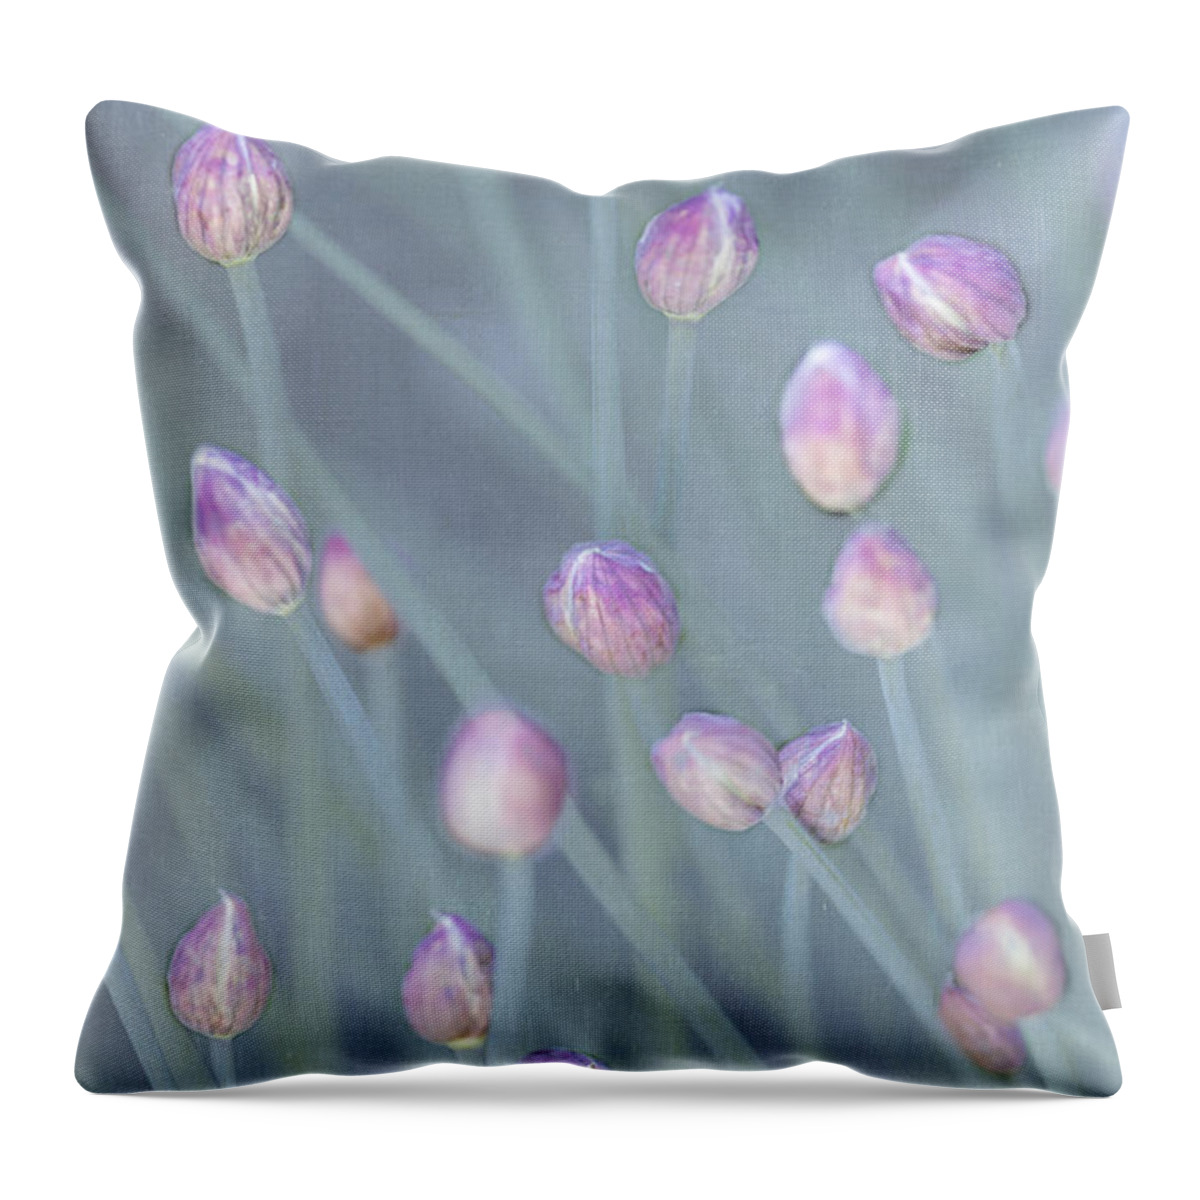 Brattleboro Vermont Spring Throw Pillow featuring the photograph Chive Buds by Tom Singleton